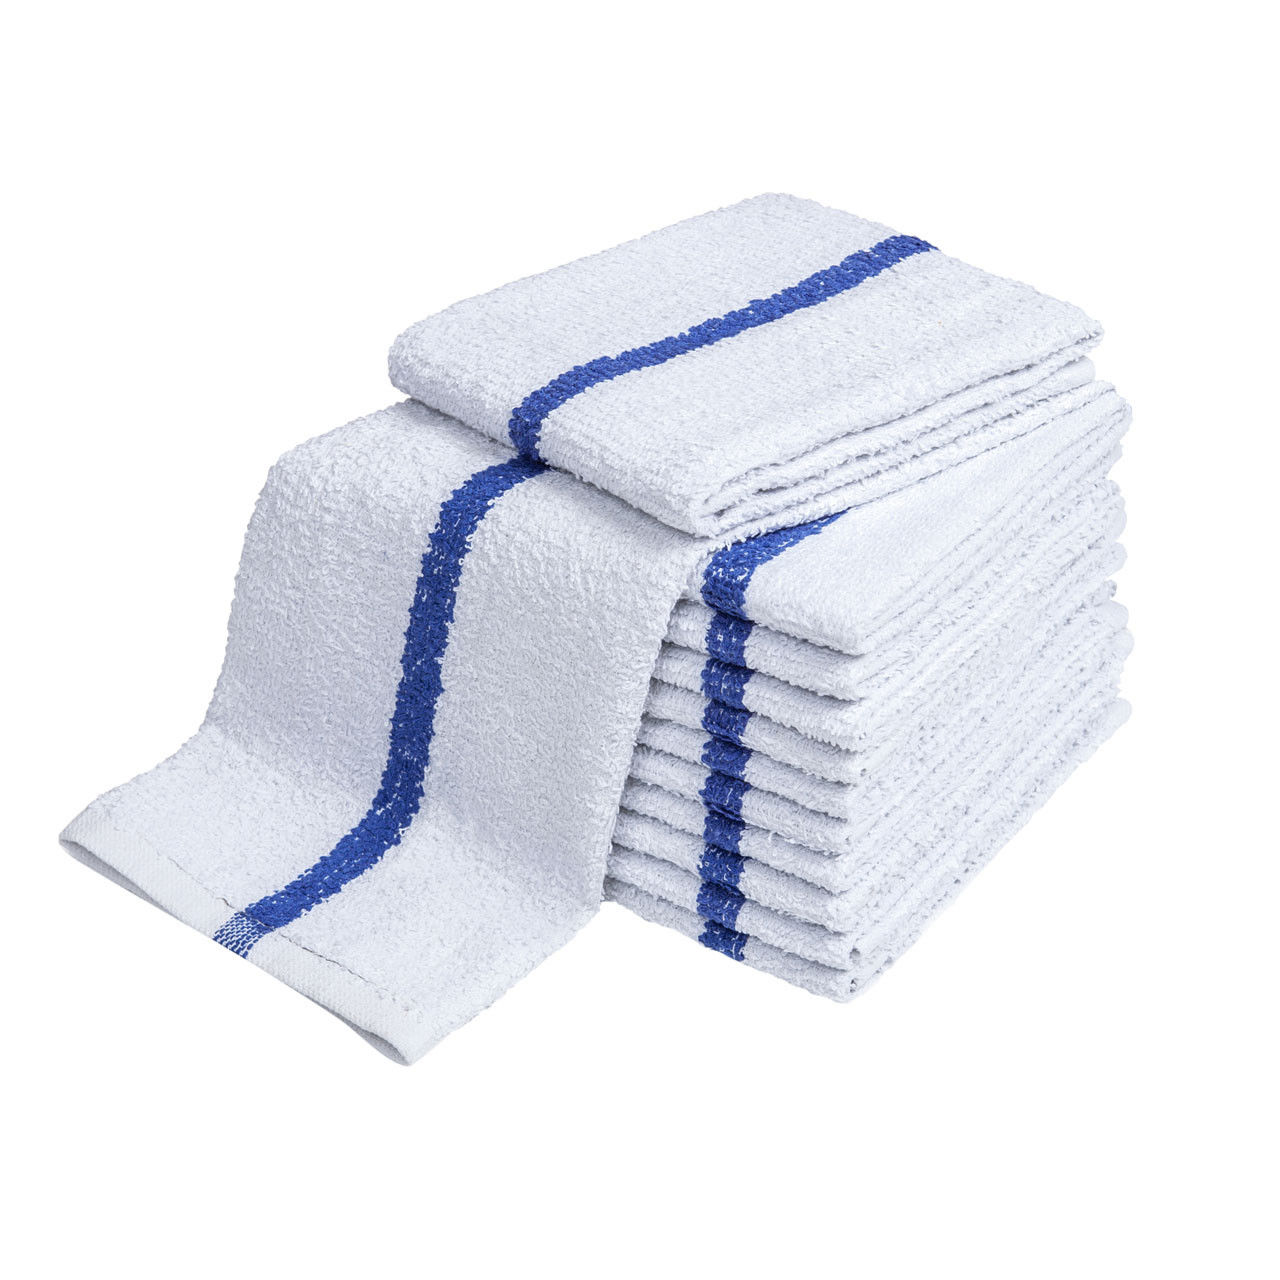 How towels are manufactured?